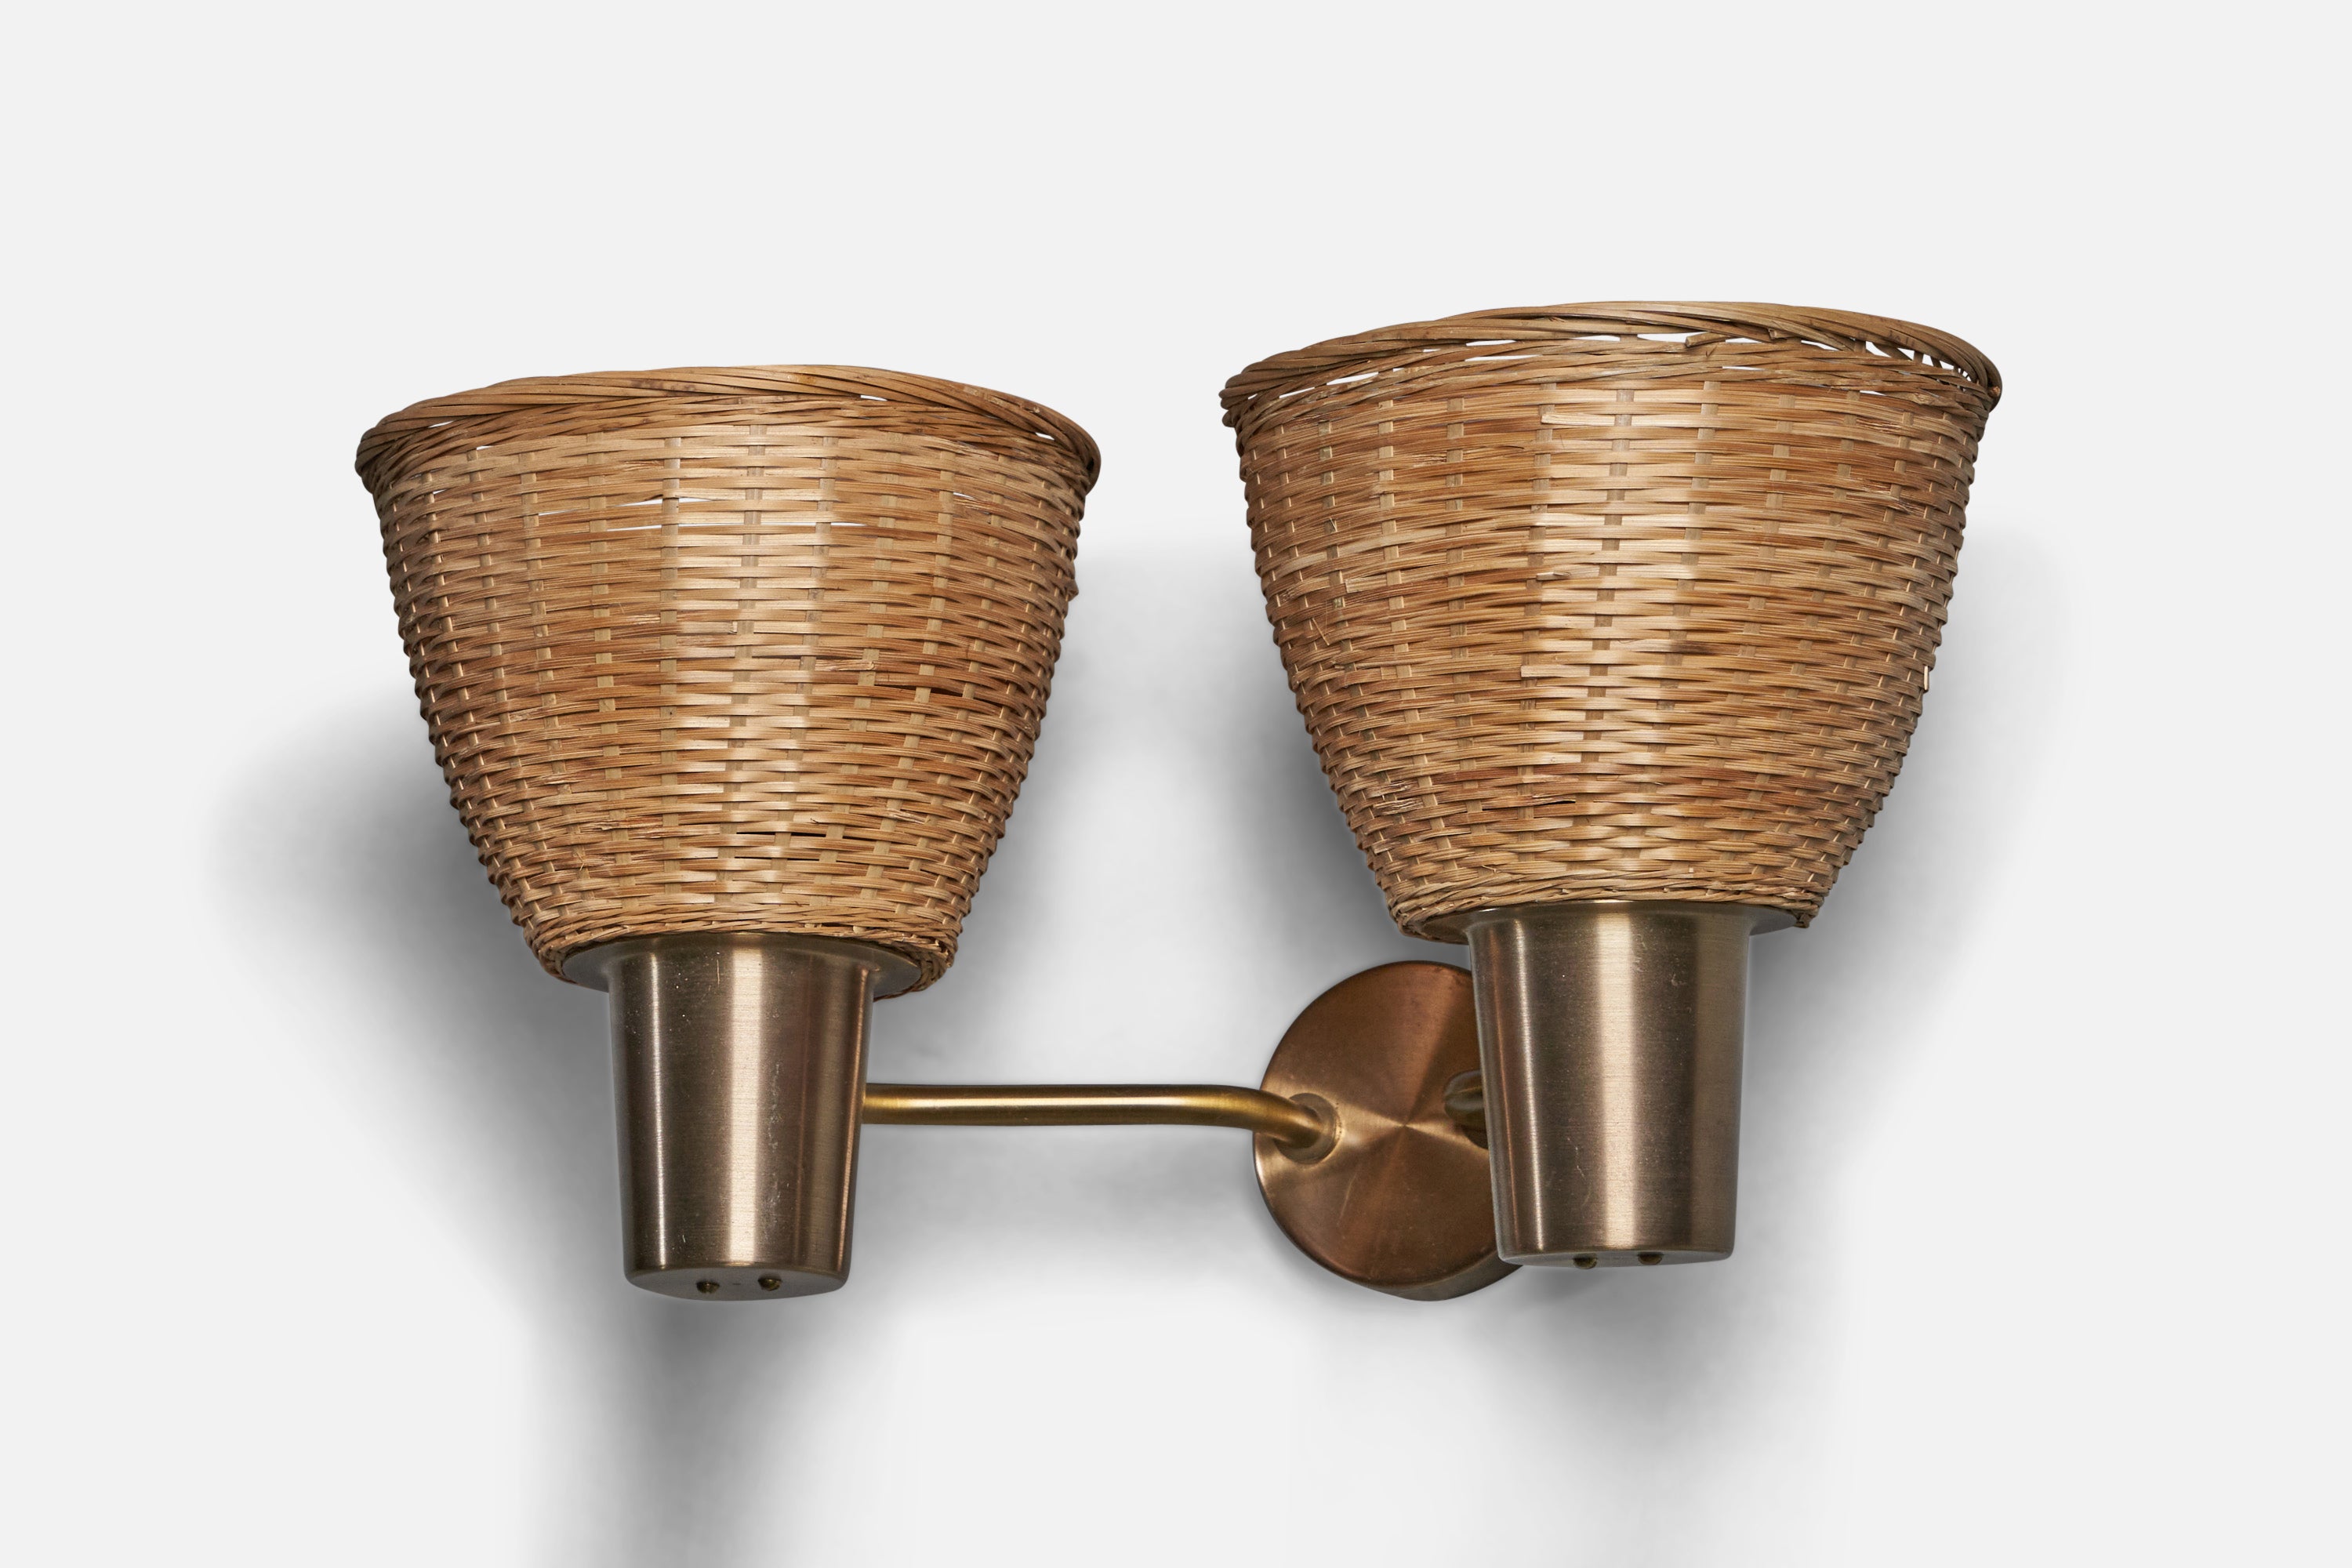 A two-armed brass and rattan wall light designed by Hans Bergström and produced by ASEA, Sweden, c. 1950s.

Overall Dimensions (inches): 8